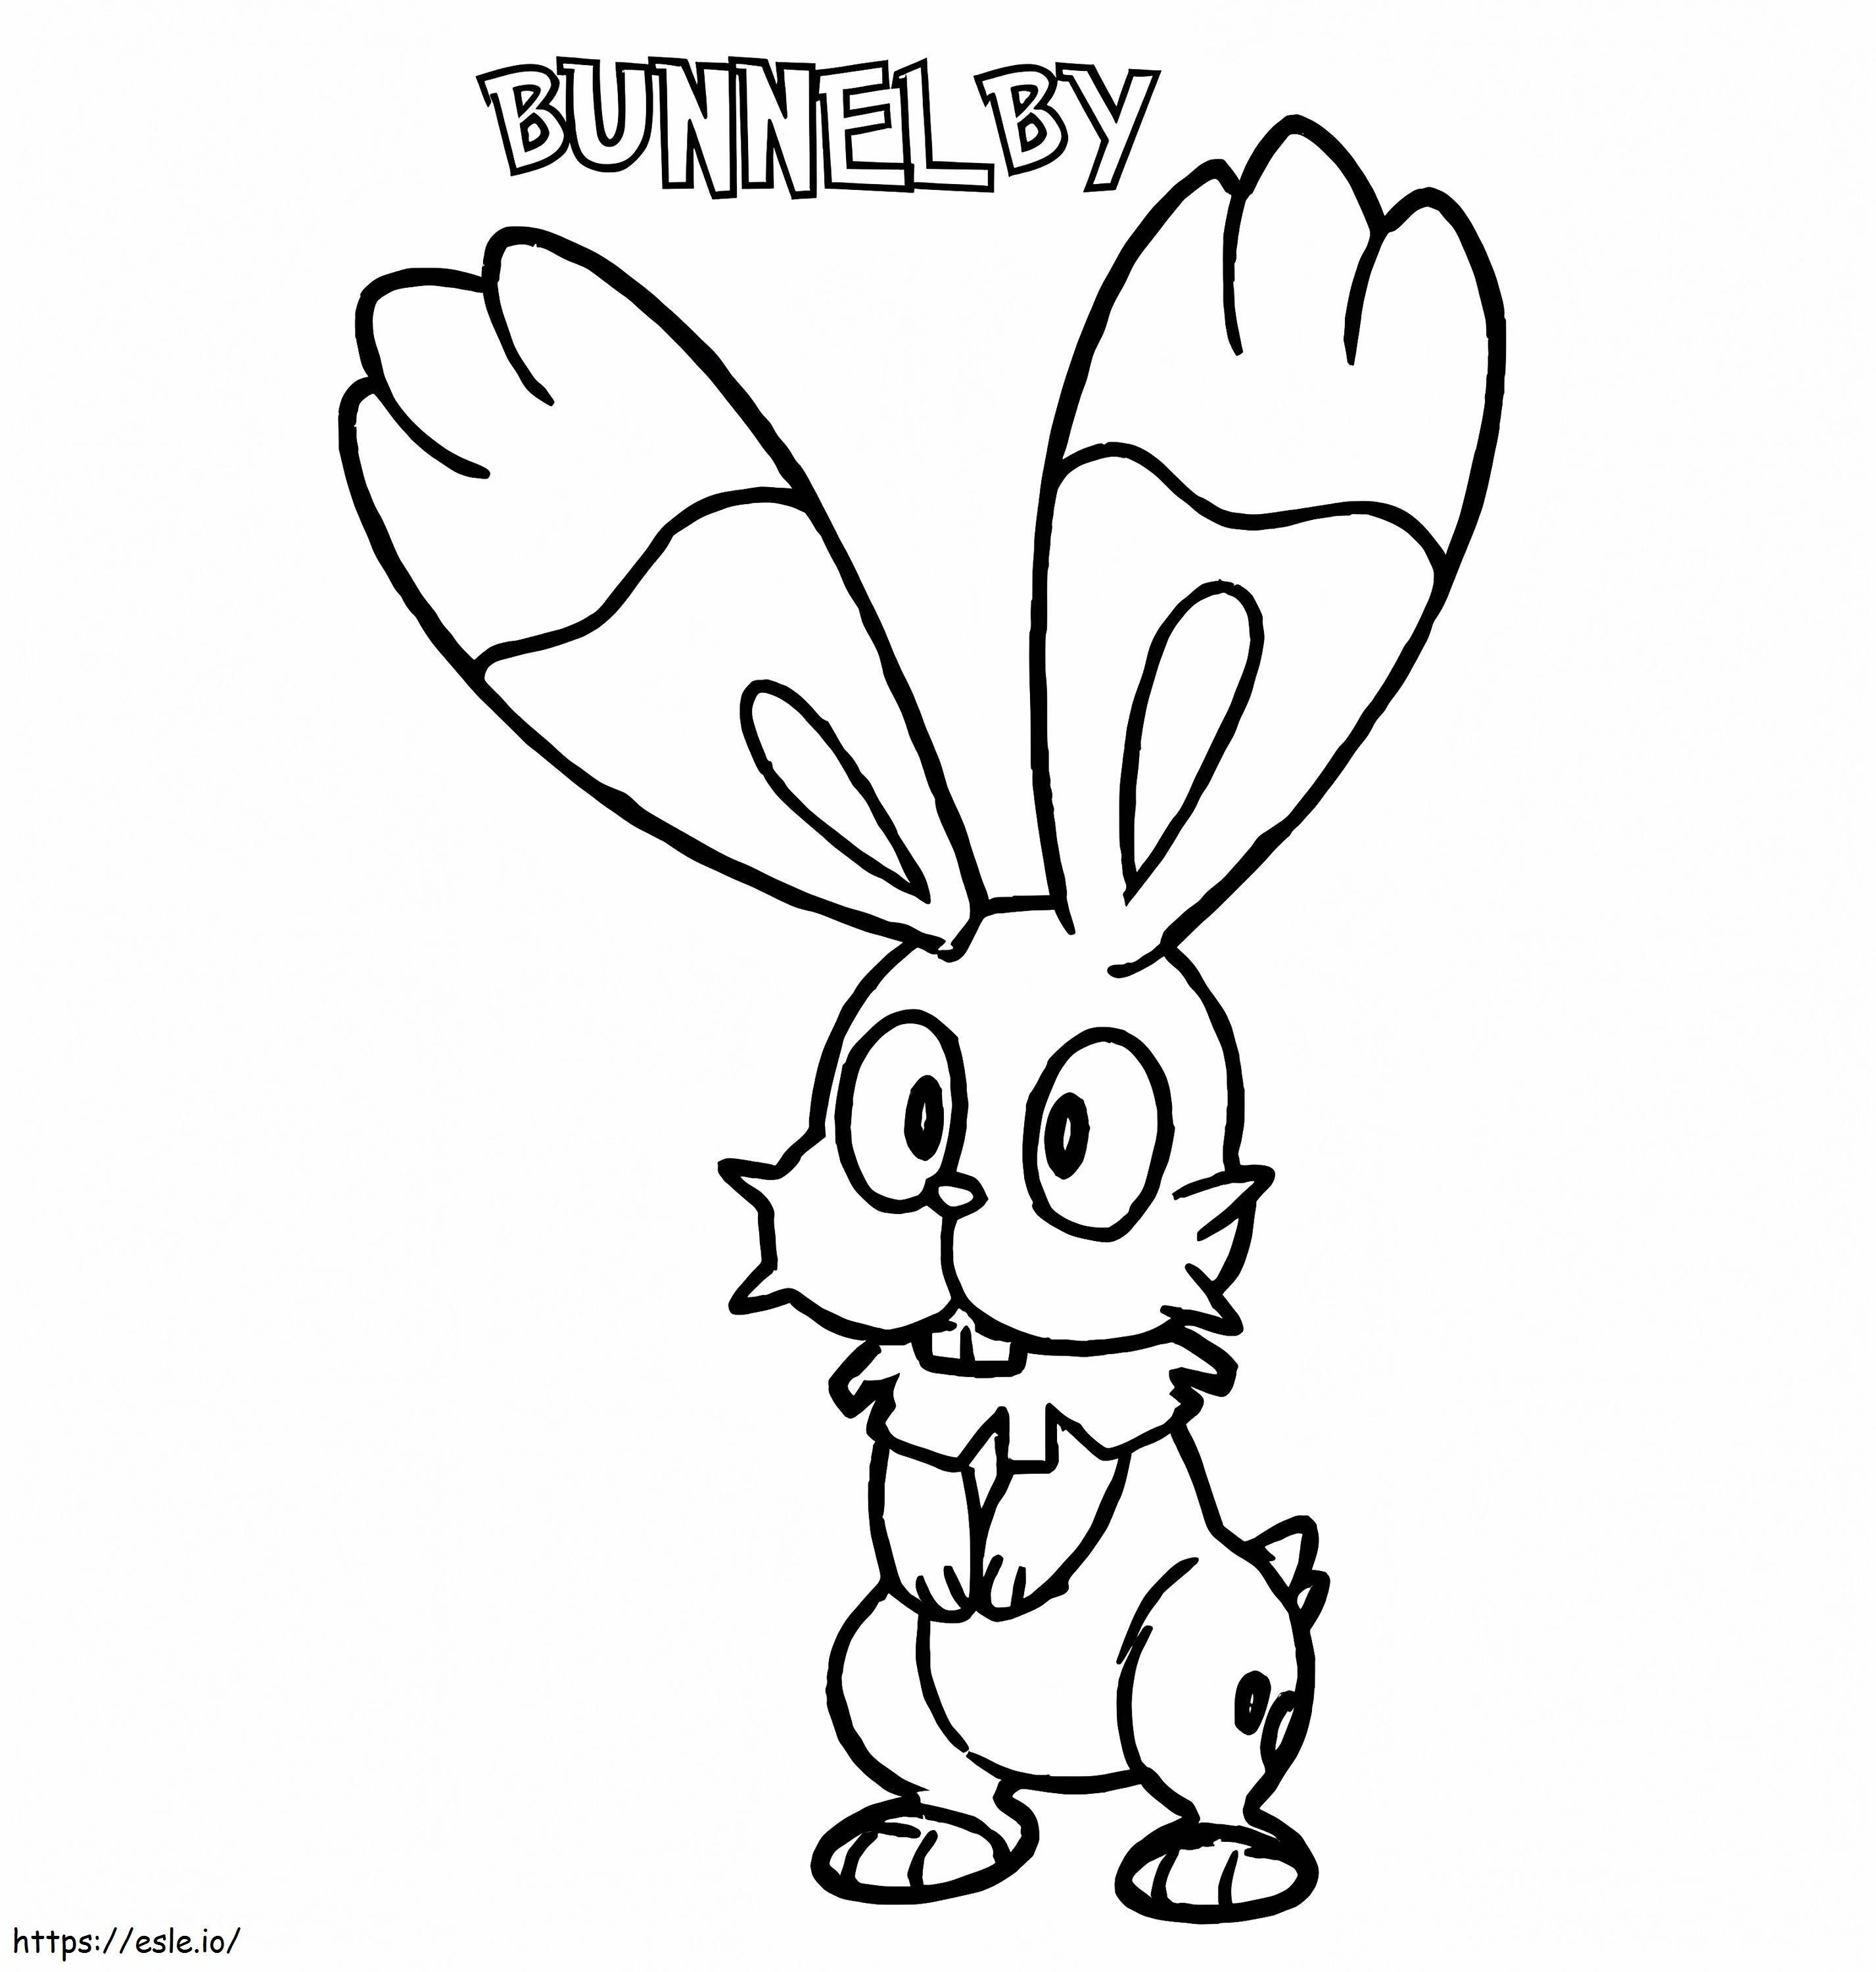 Bunnelby Pokemon coloring page